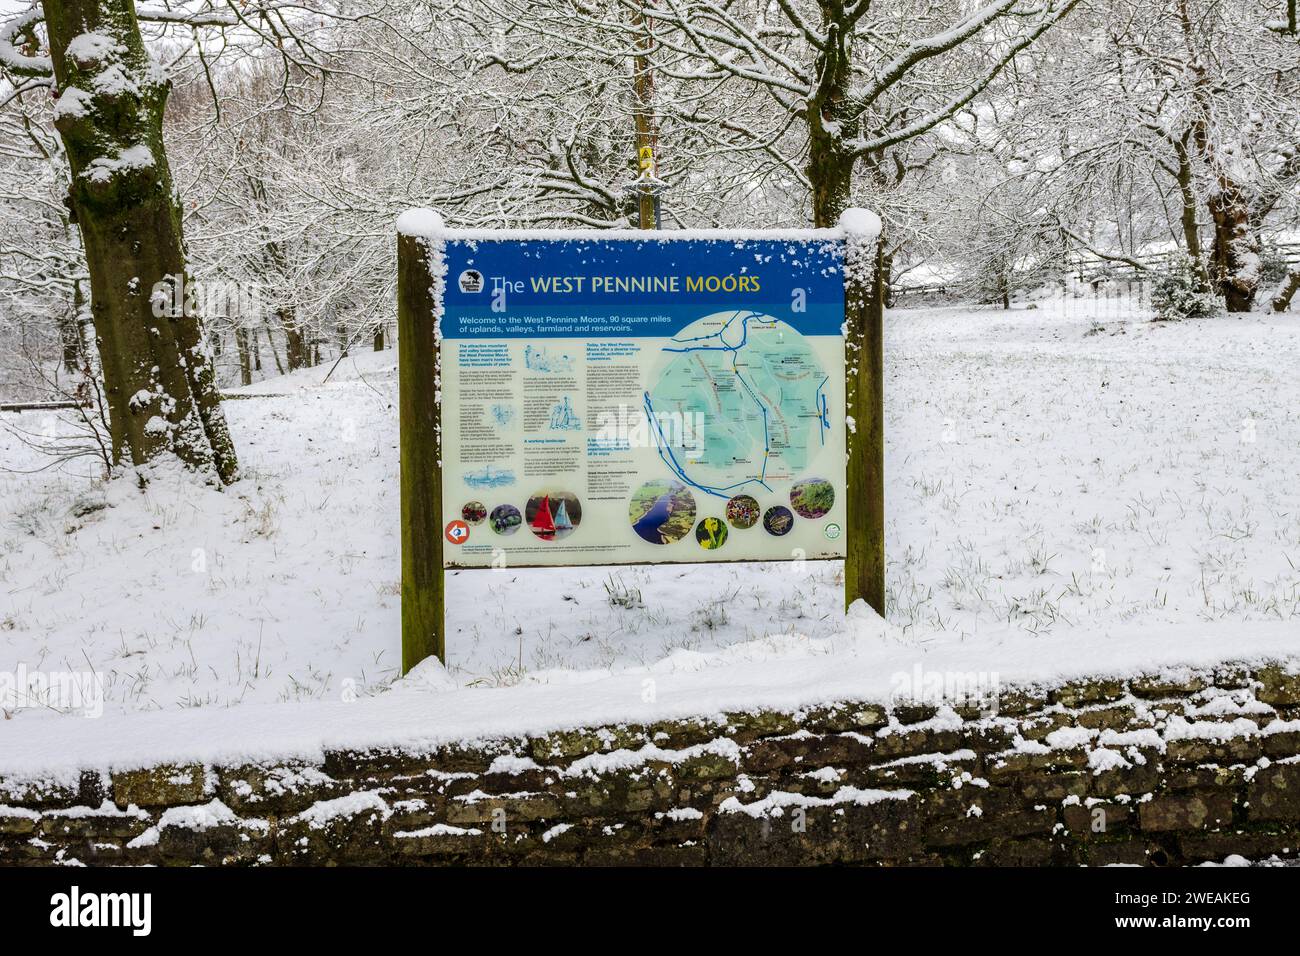 The West Pennine Moors sign covered in snow Stock Photo